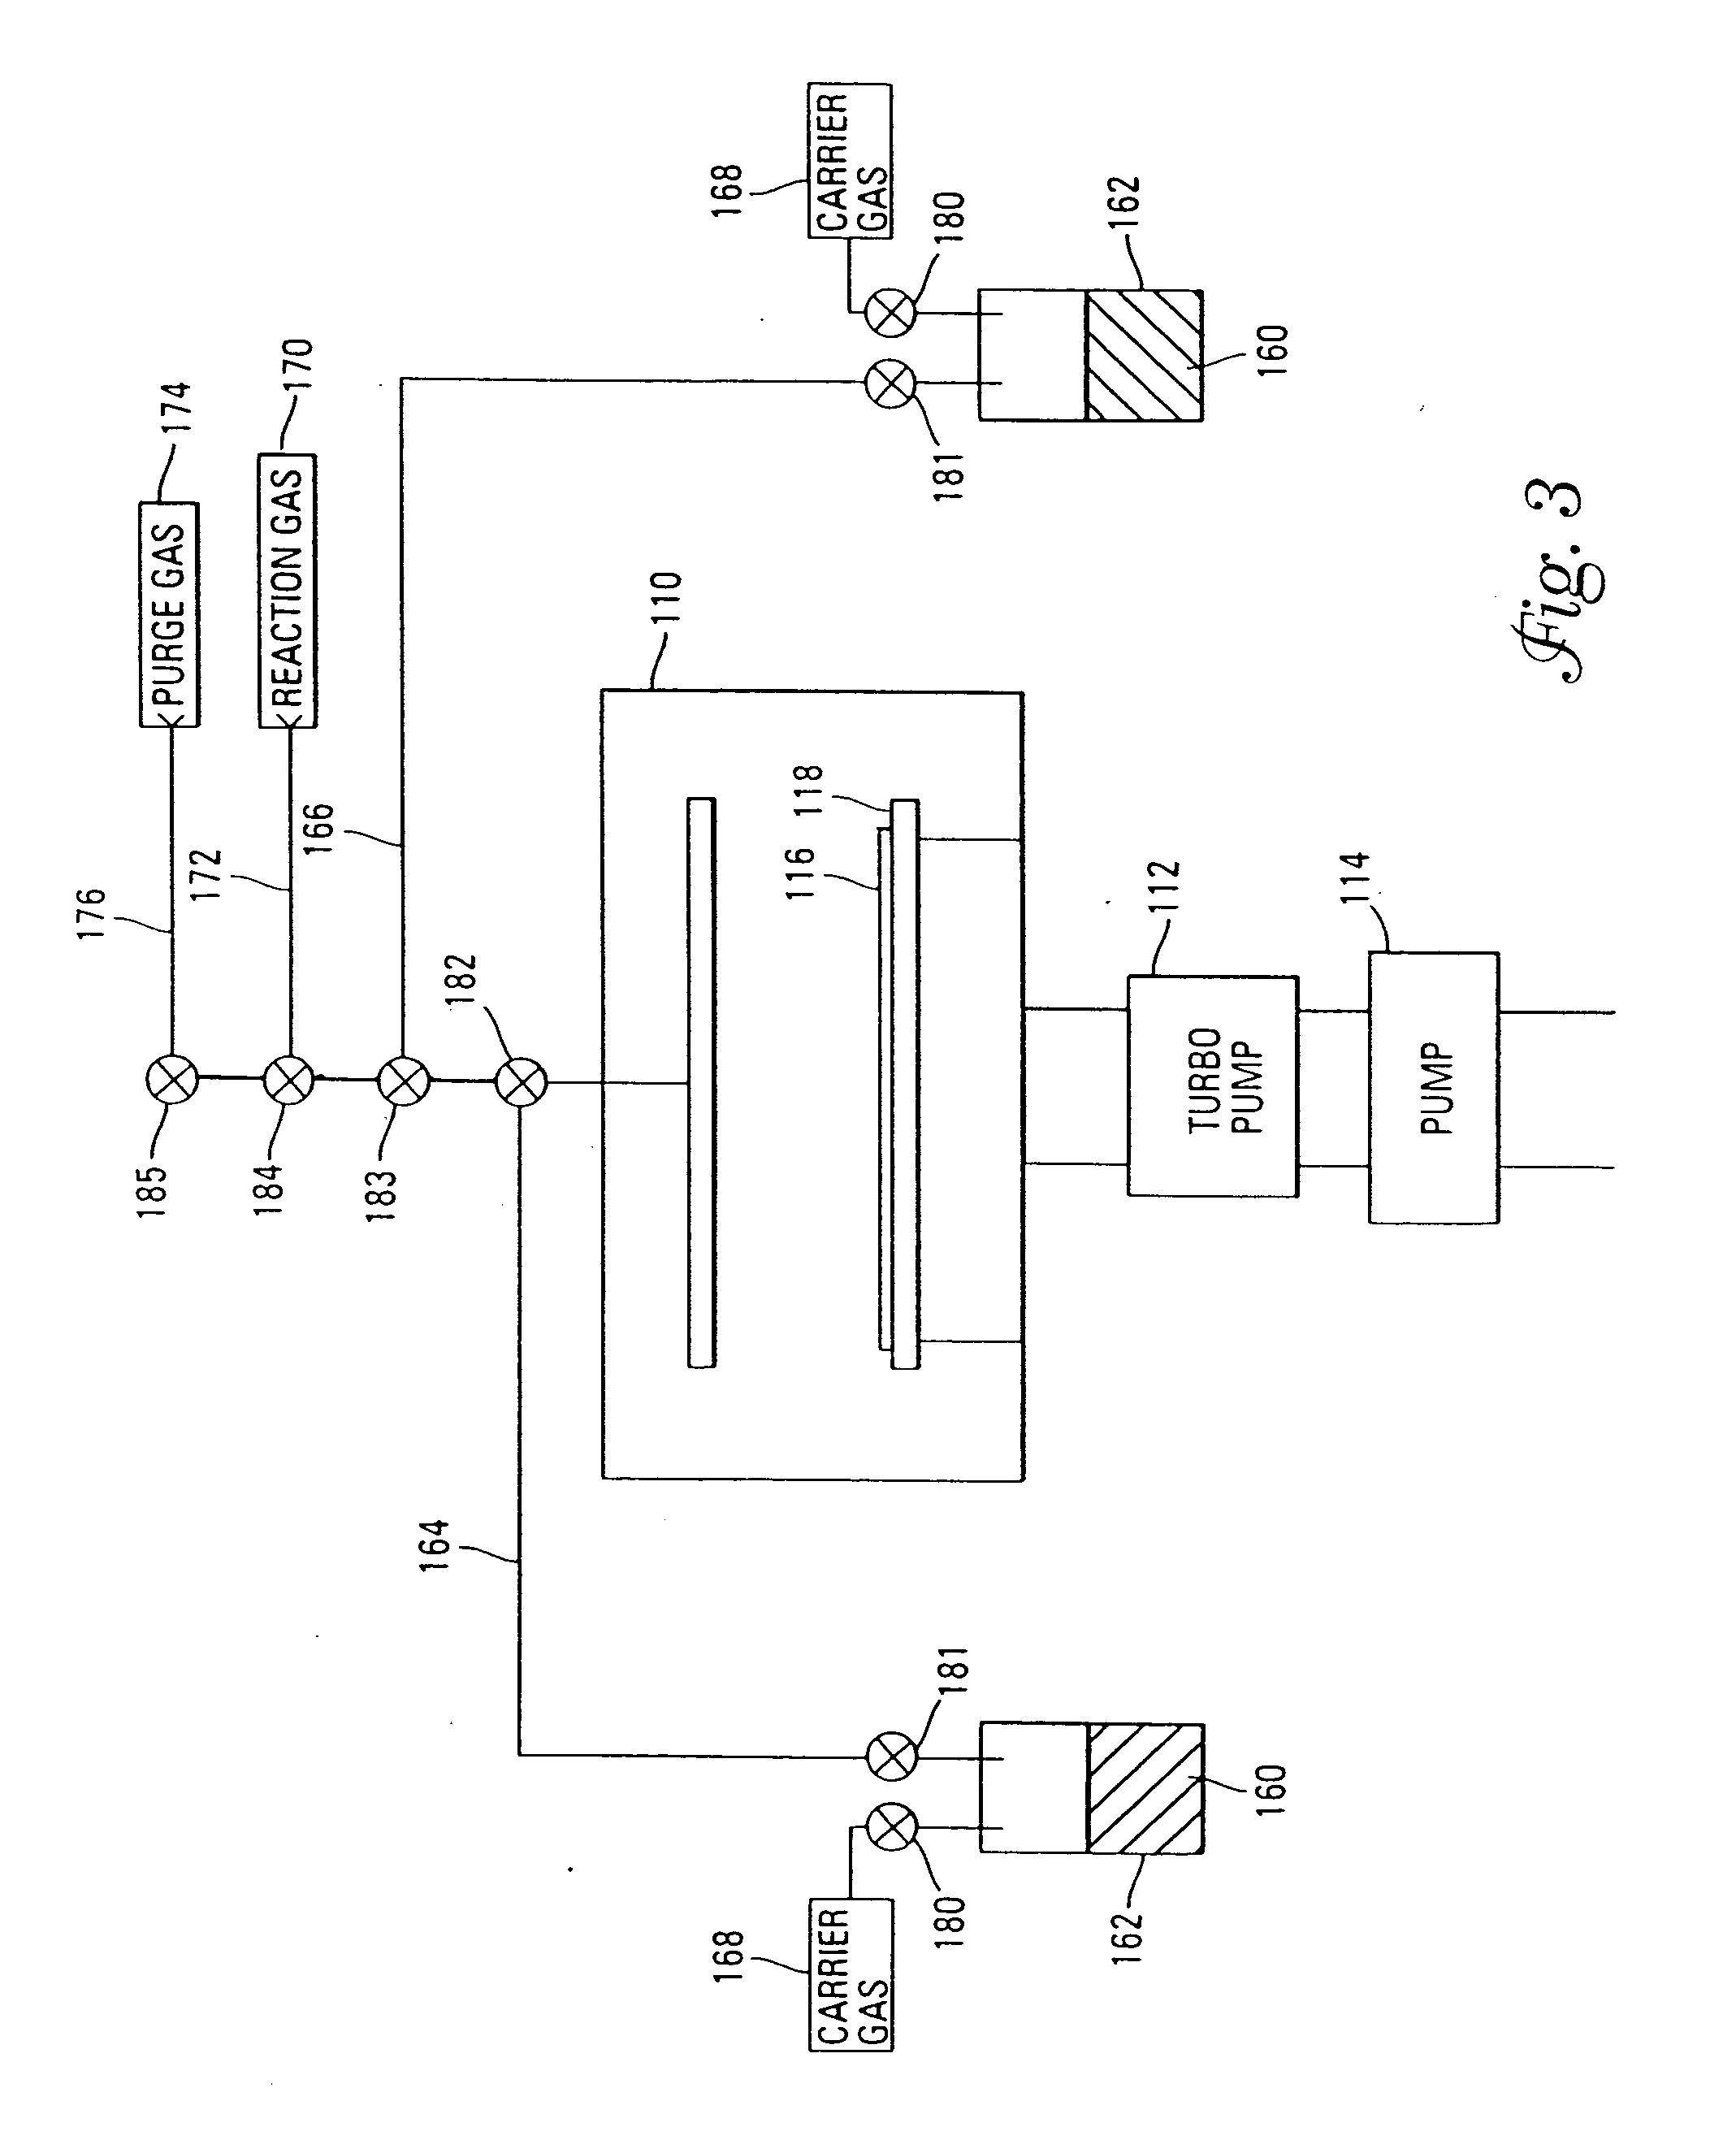 Systems and methods of forming refractory metal nitride layers using organic amines